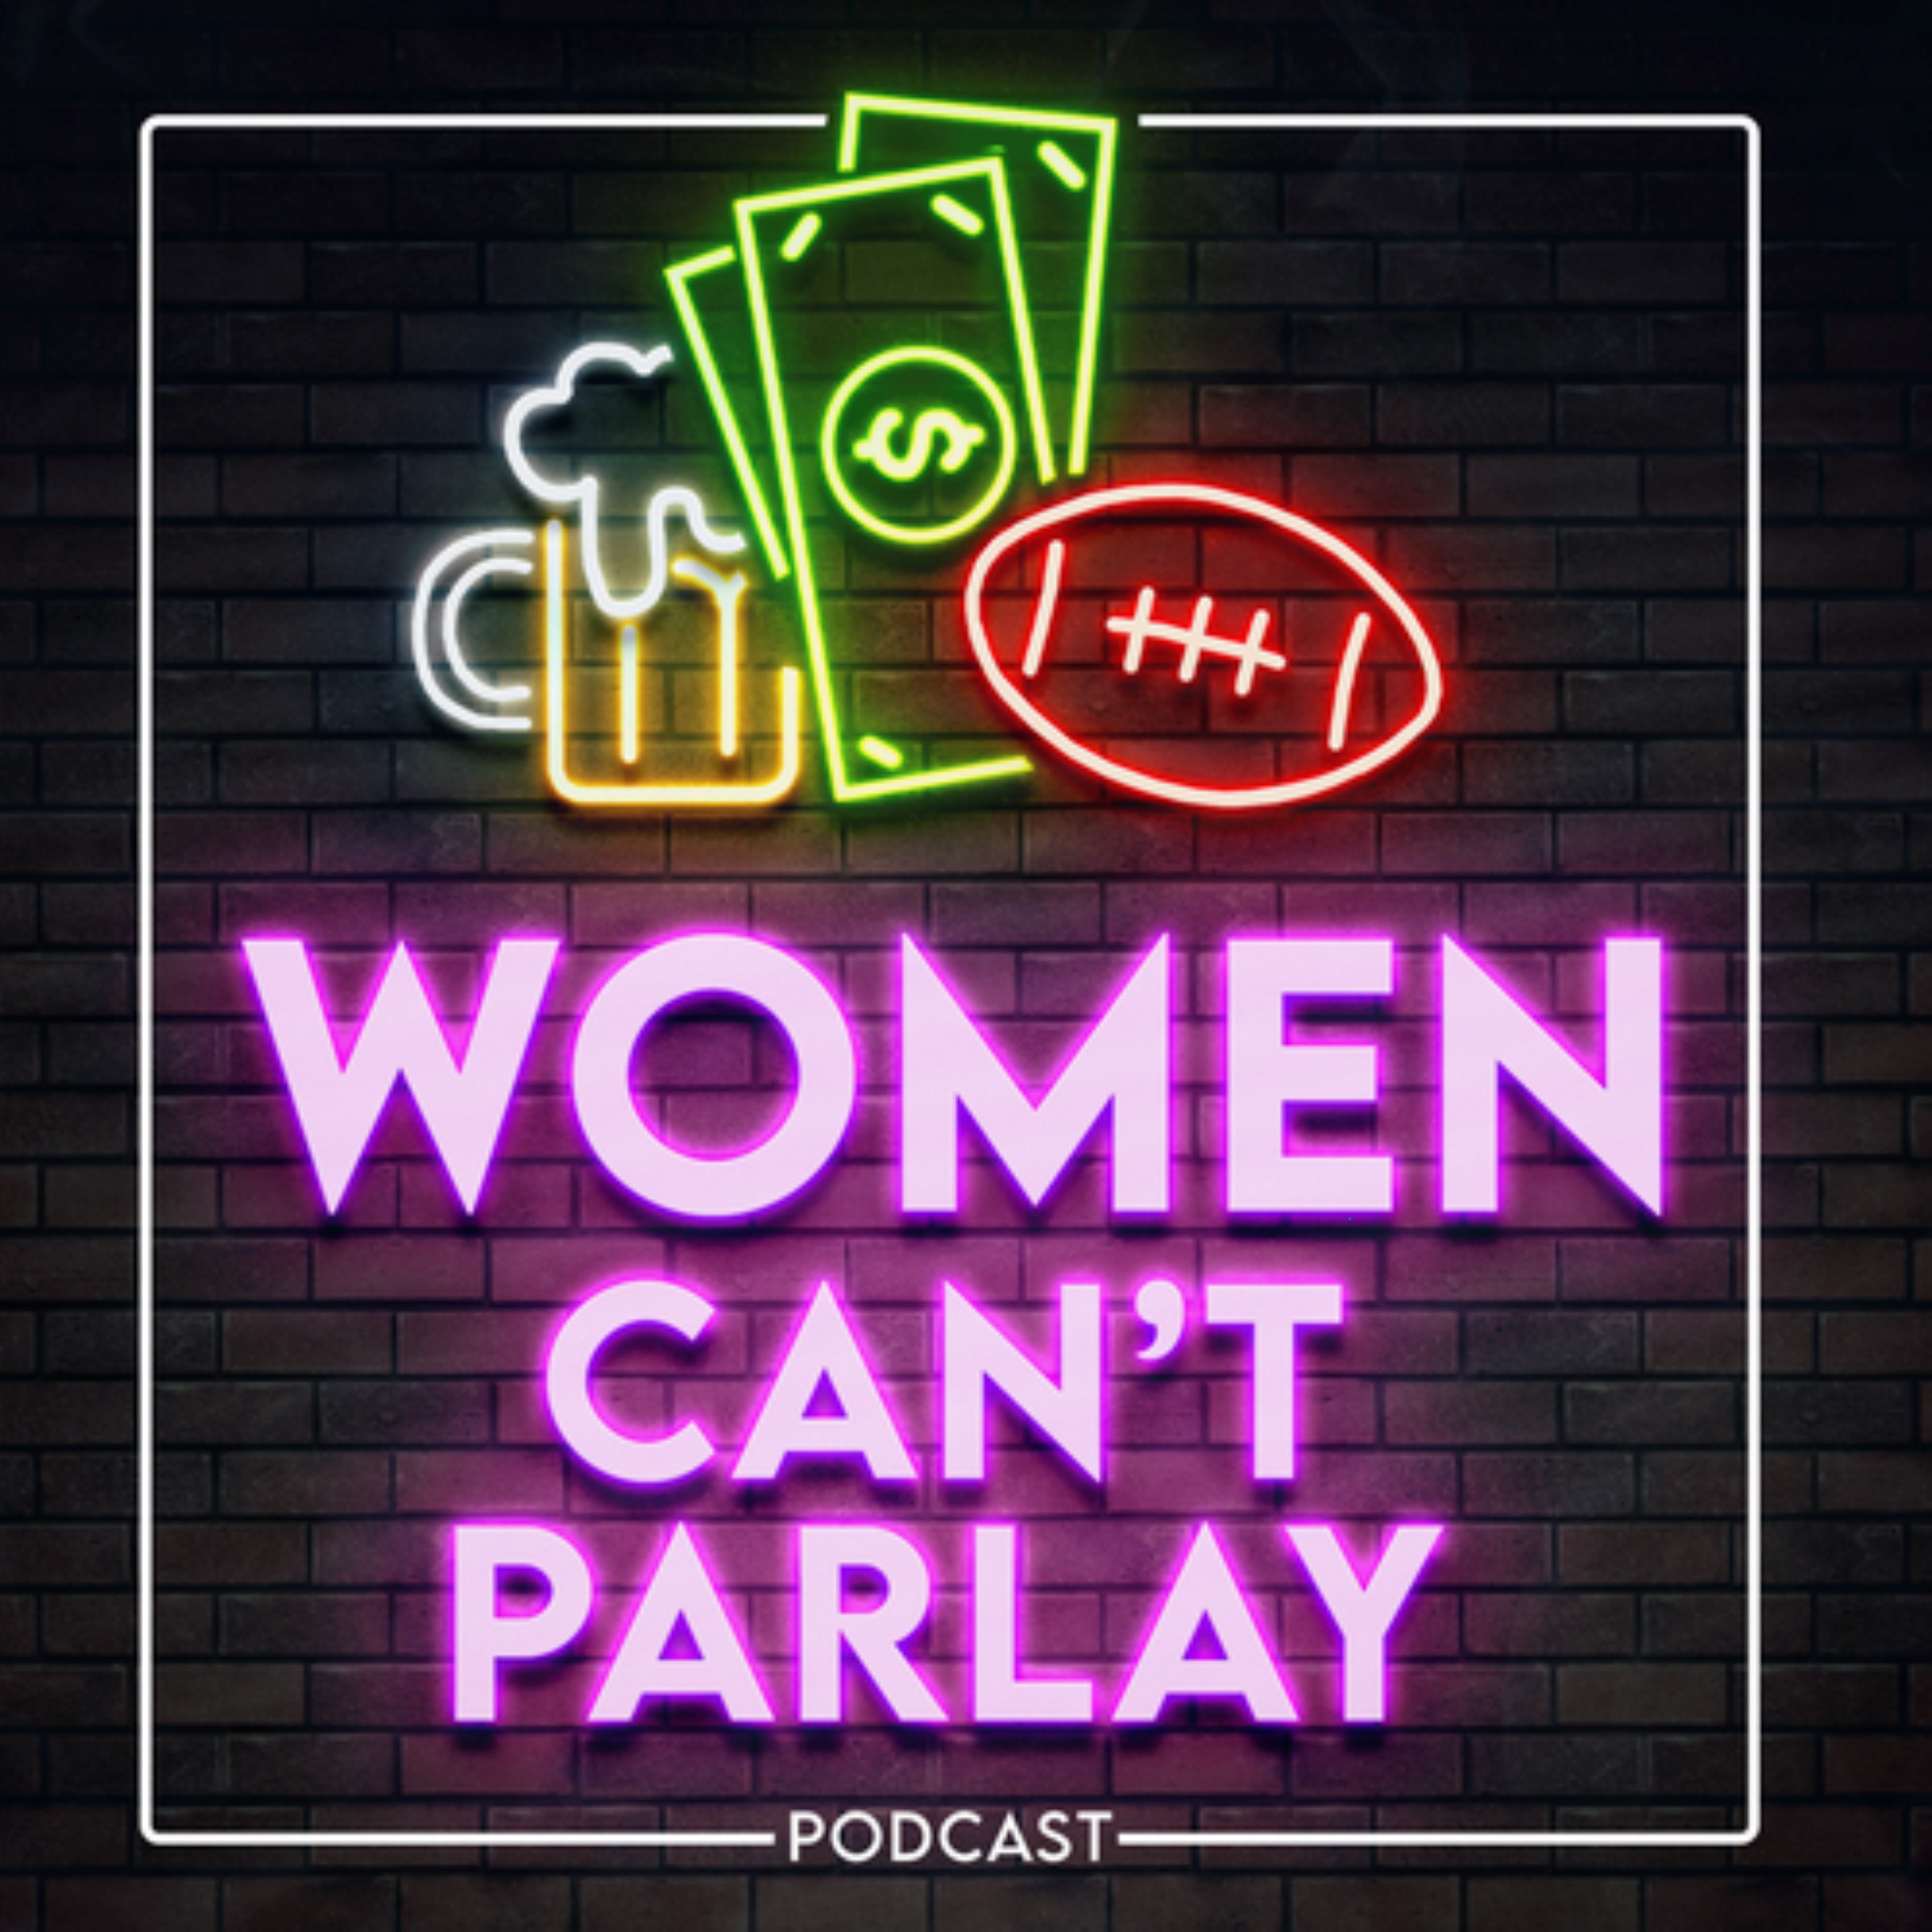 Artwork for Women Can't Parlay